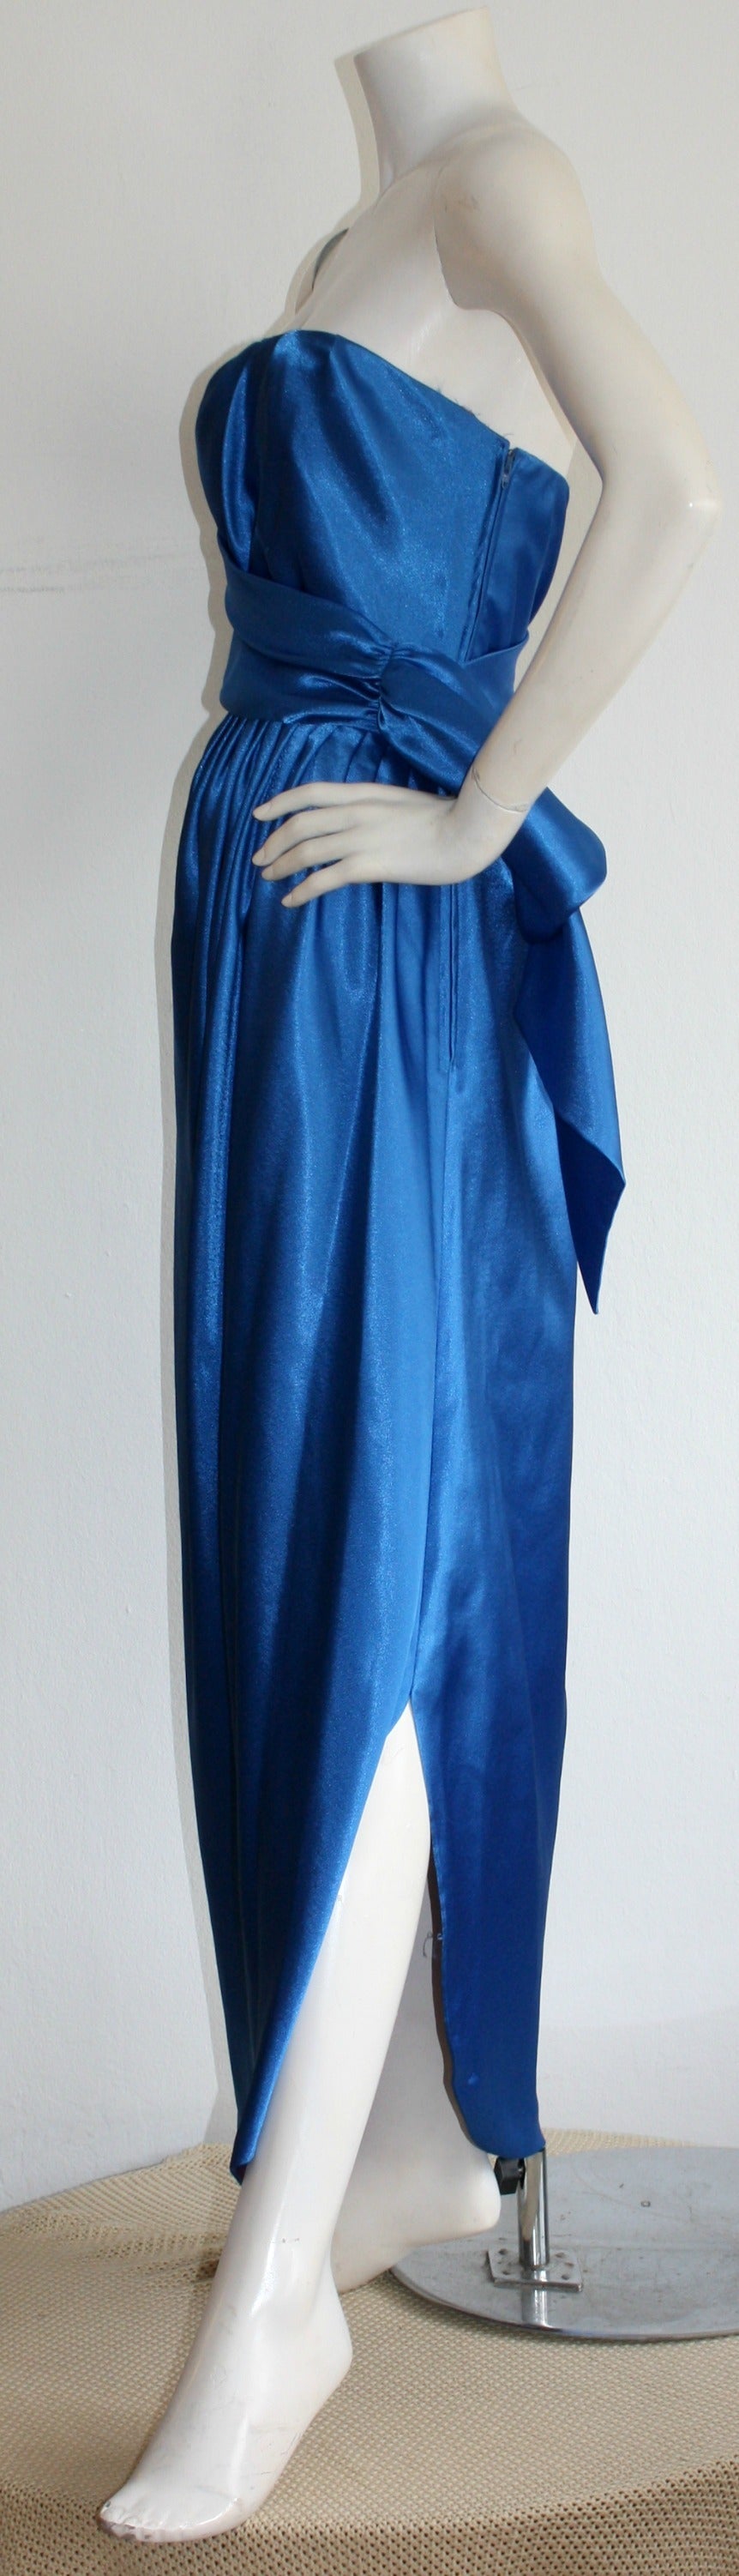 Stunning vintage Frank Usher for Neiman Marcus gown! So much detail was put into this lovely creation! Remarkable blue color, on the most luscious silk. Drapes in all the right places, with an attached sash at waist. Knife-edge hem. Fully lined.